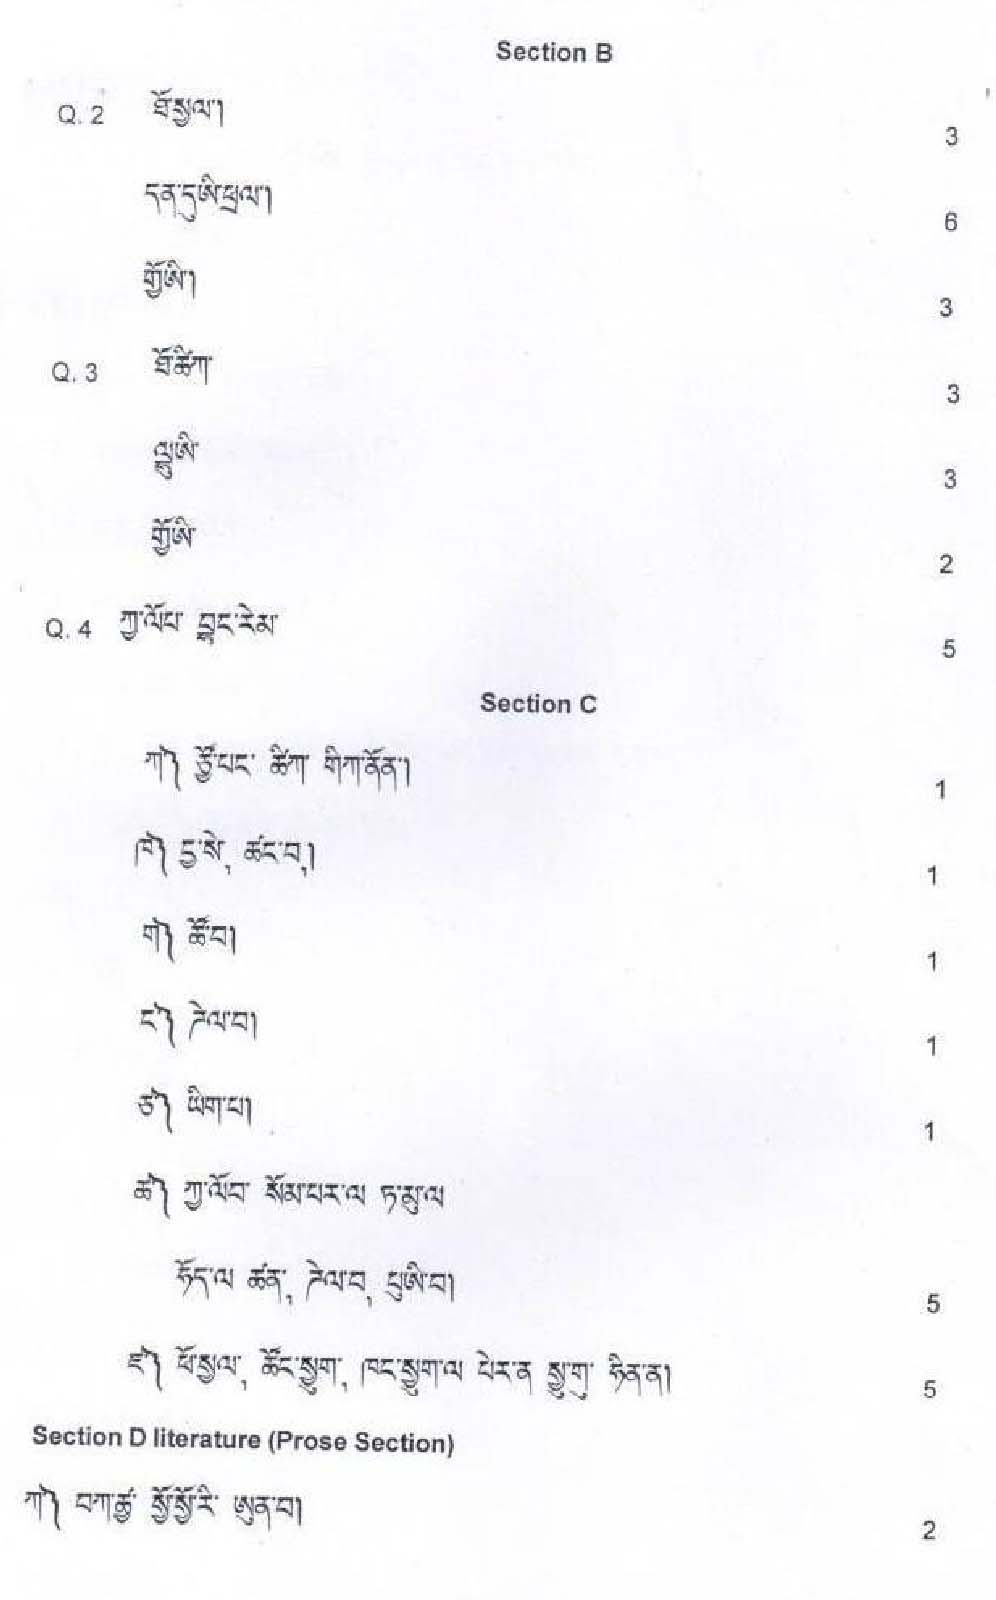 Tamang CBSE Class X Sample Question Paper 2018-19 - Image 6